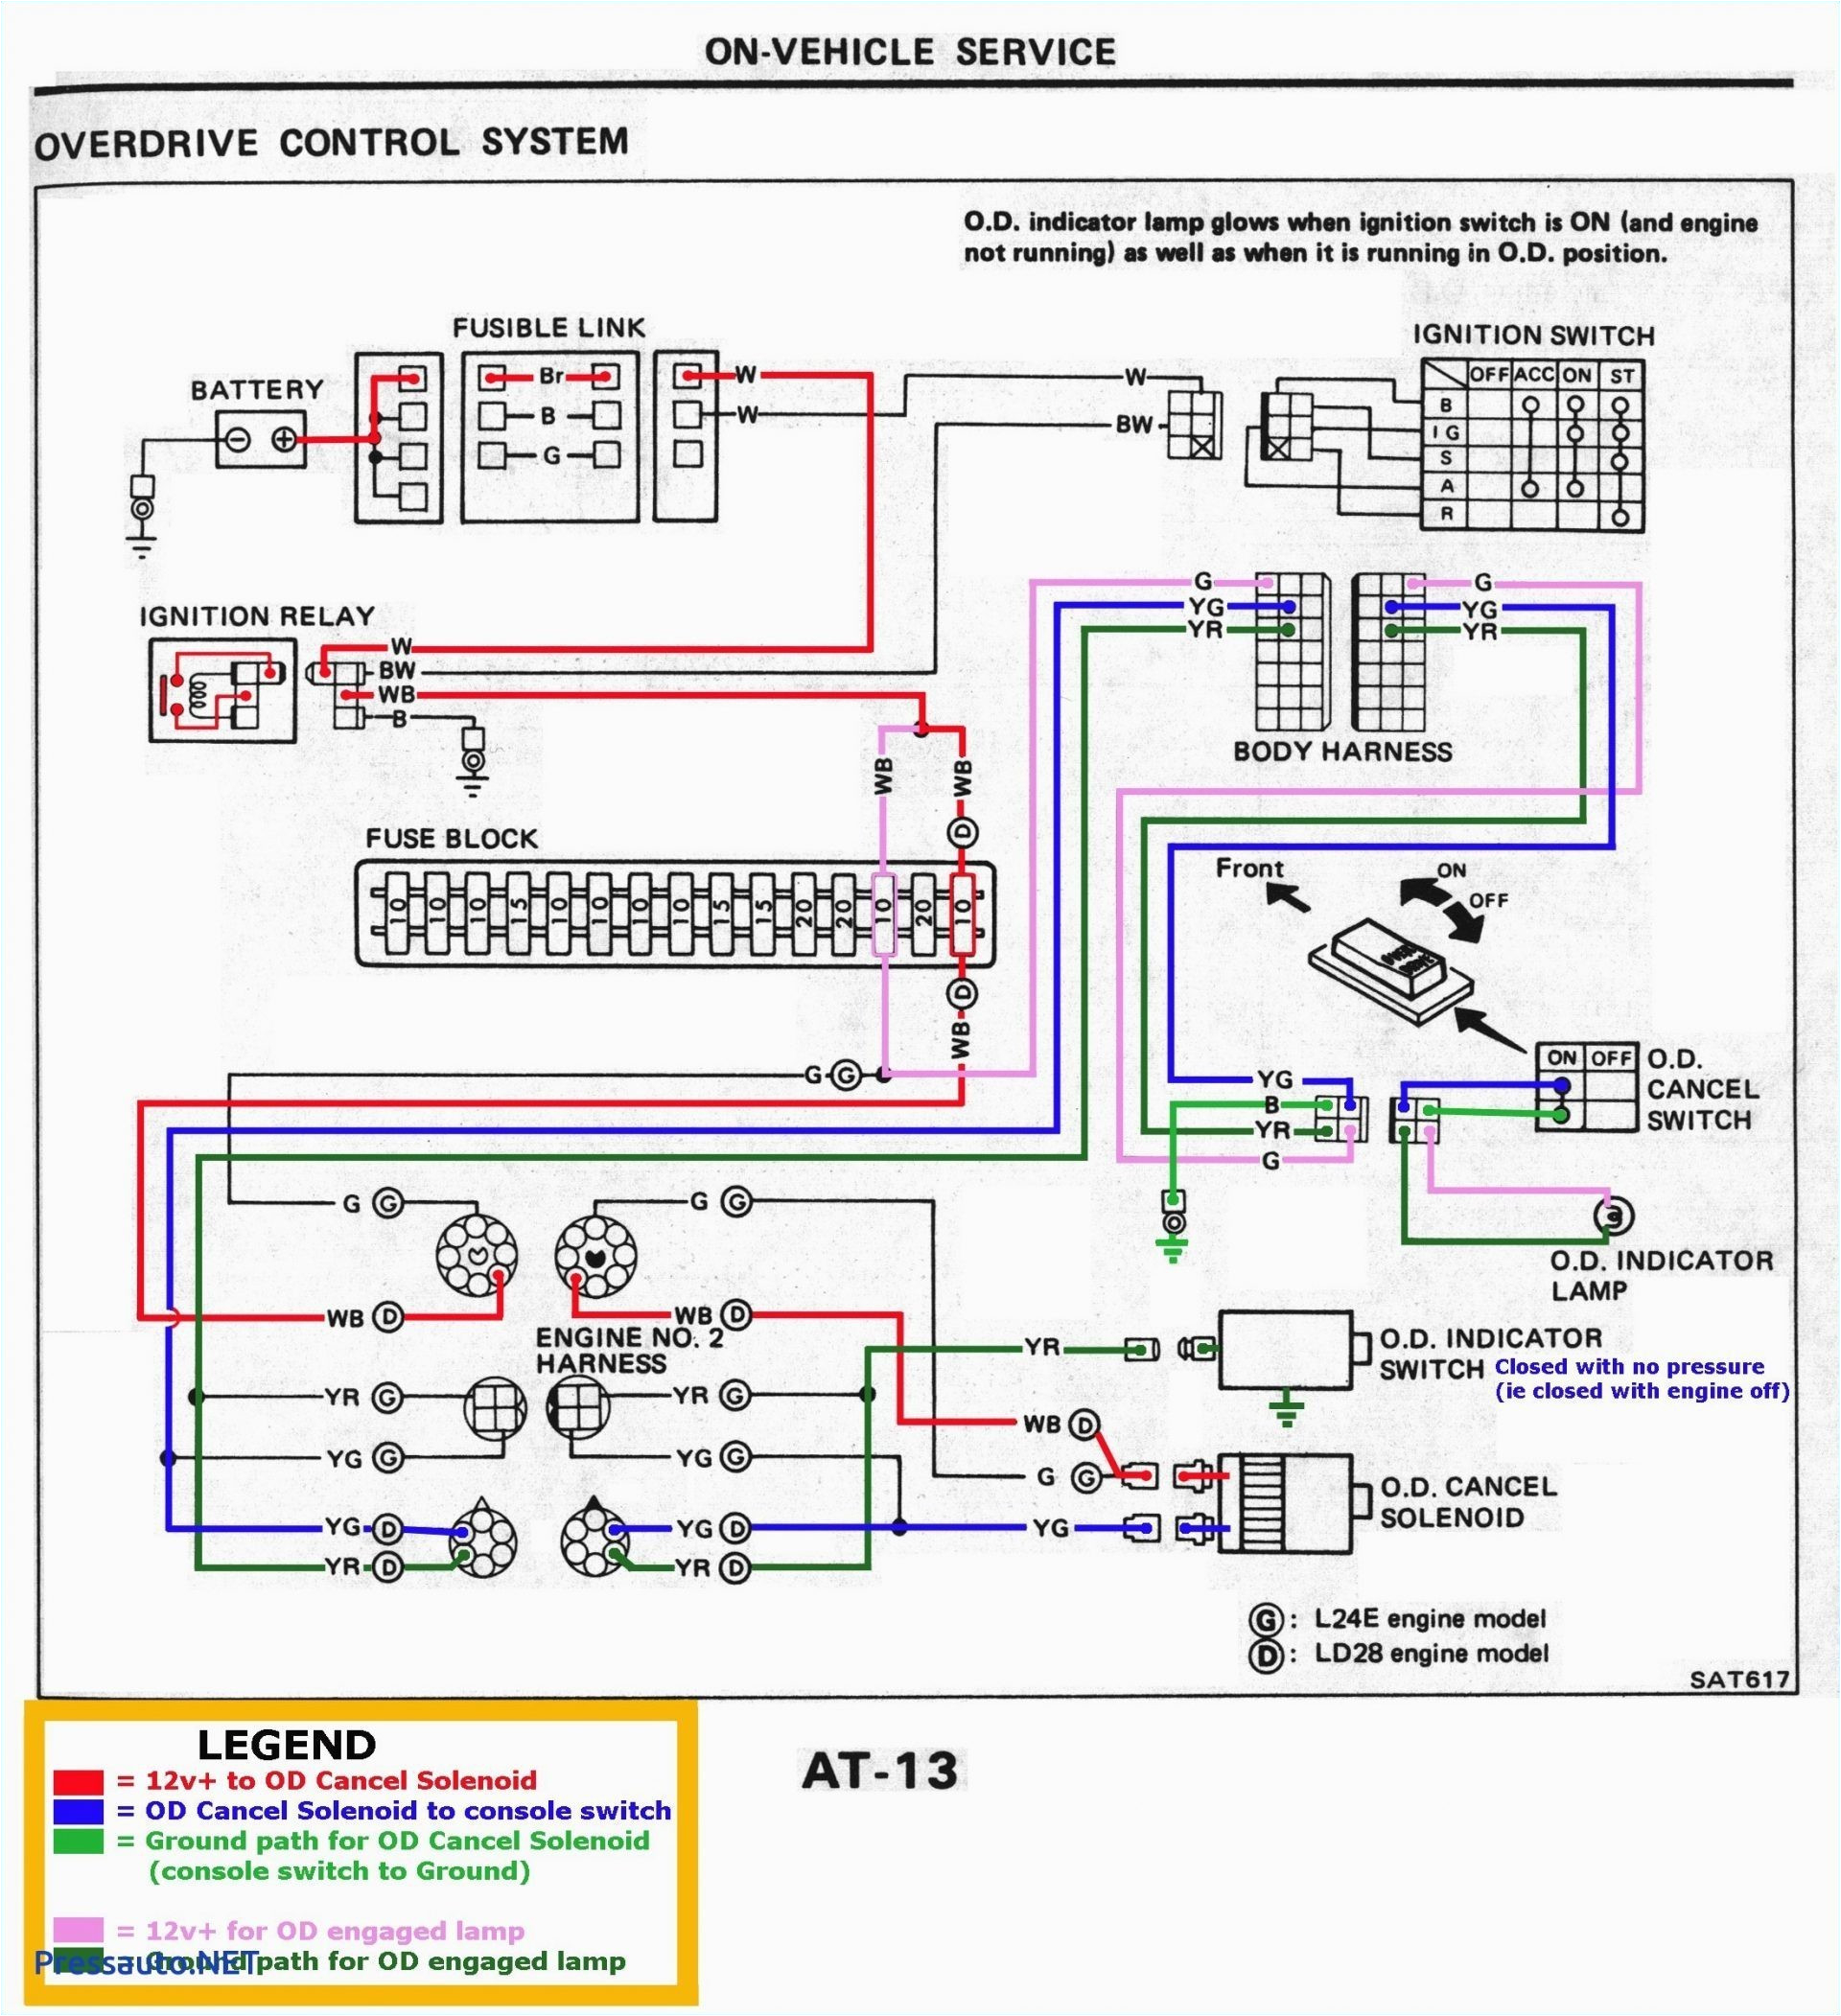 2002 dodge ram 1500 ignition coil wiring diagram home wiring diagram 2002 dodge ram 1500 ignition